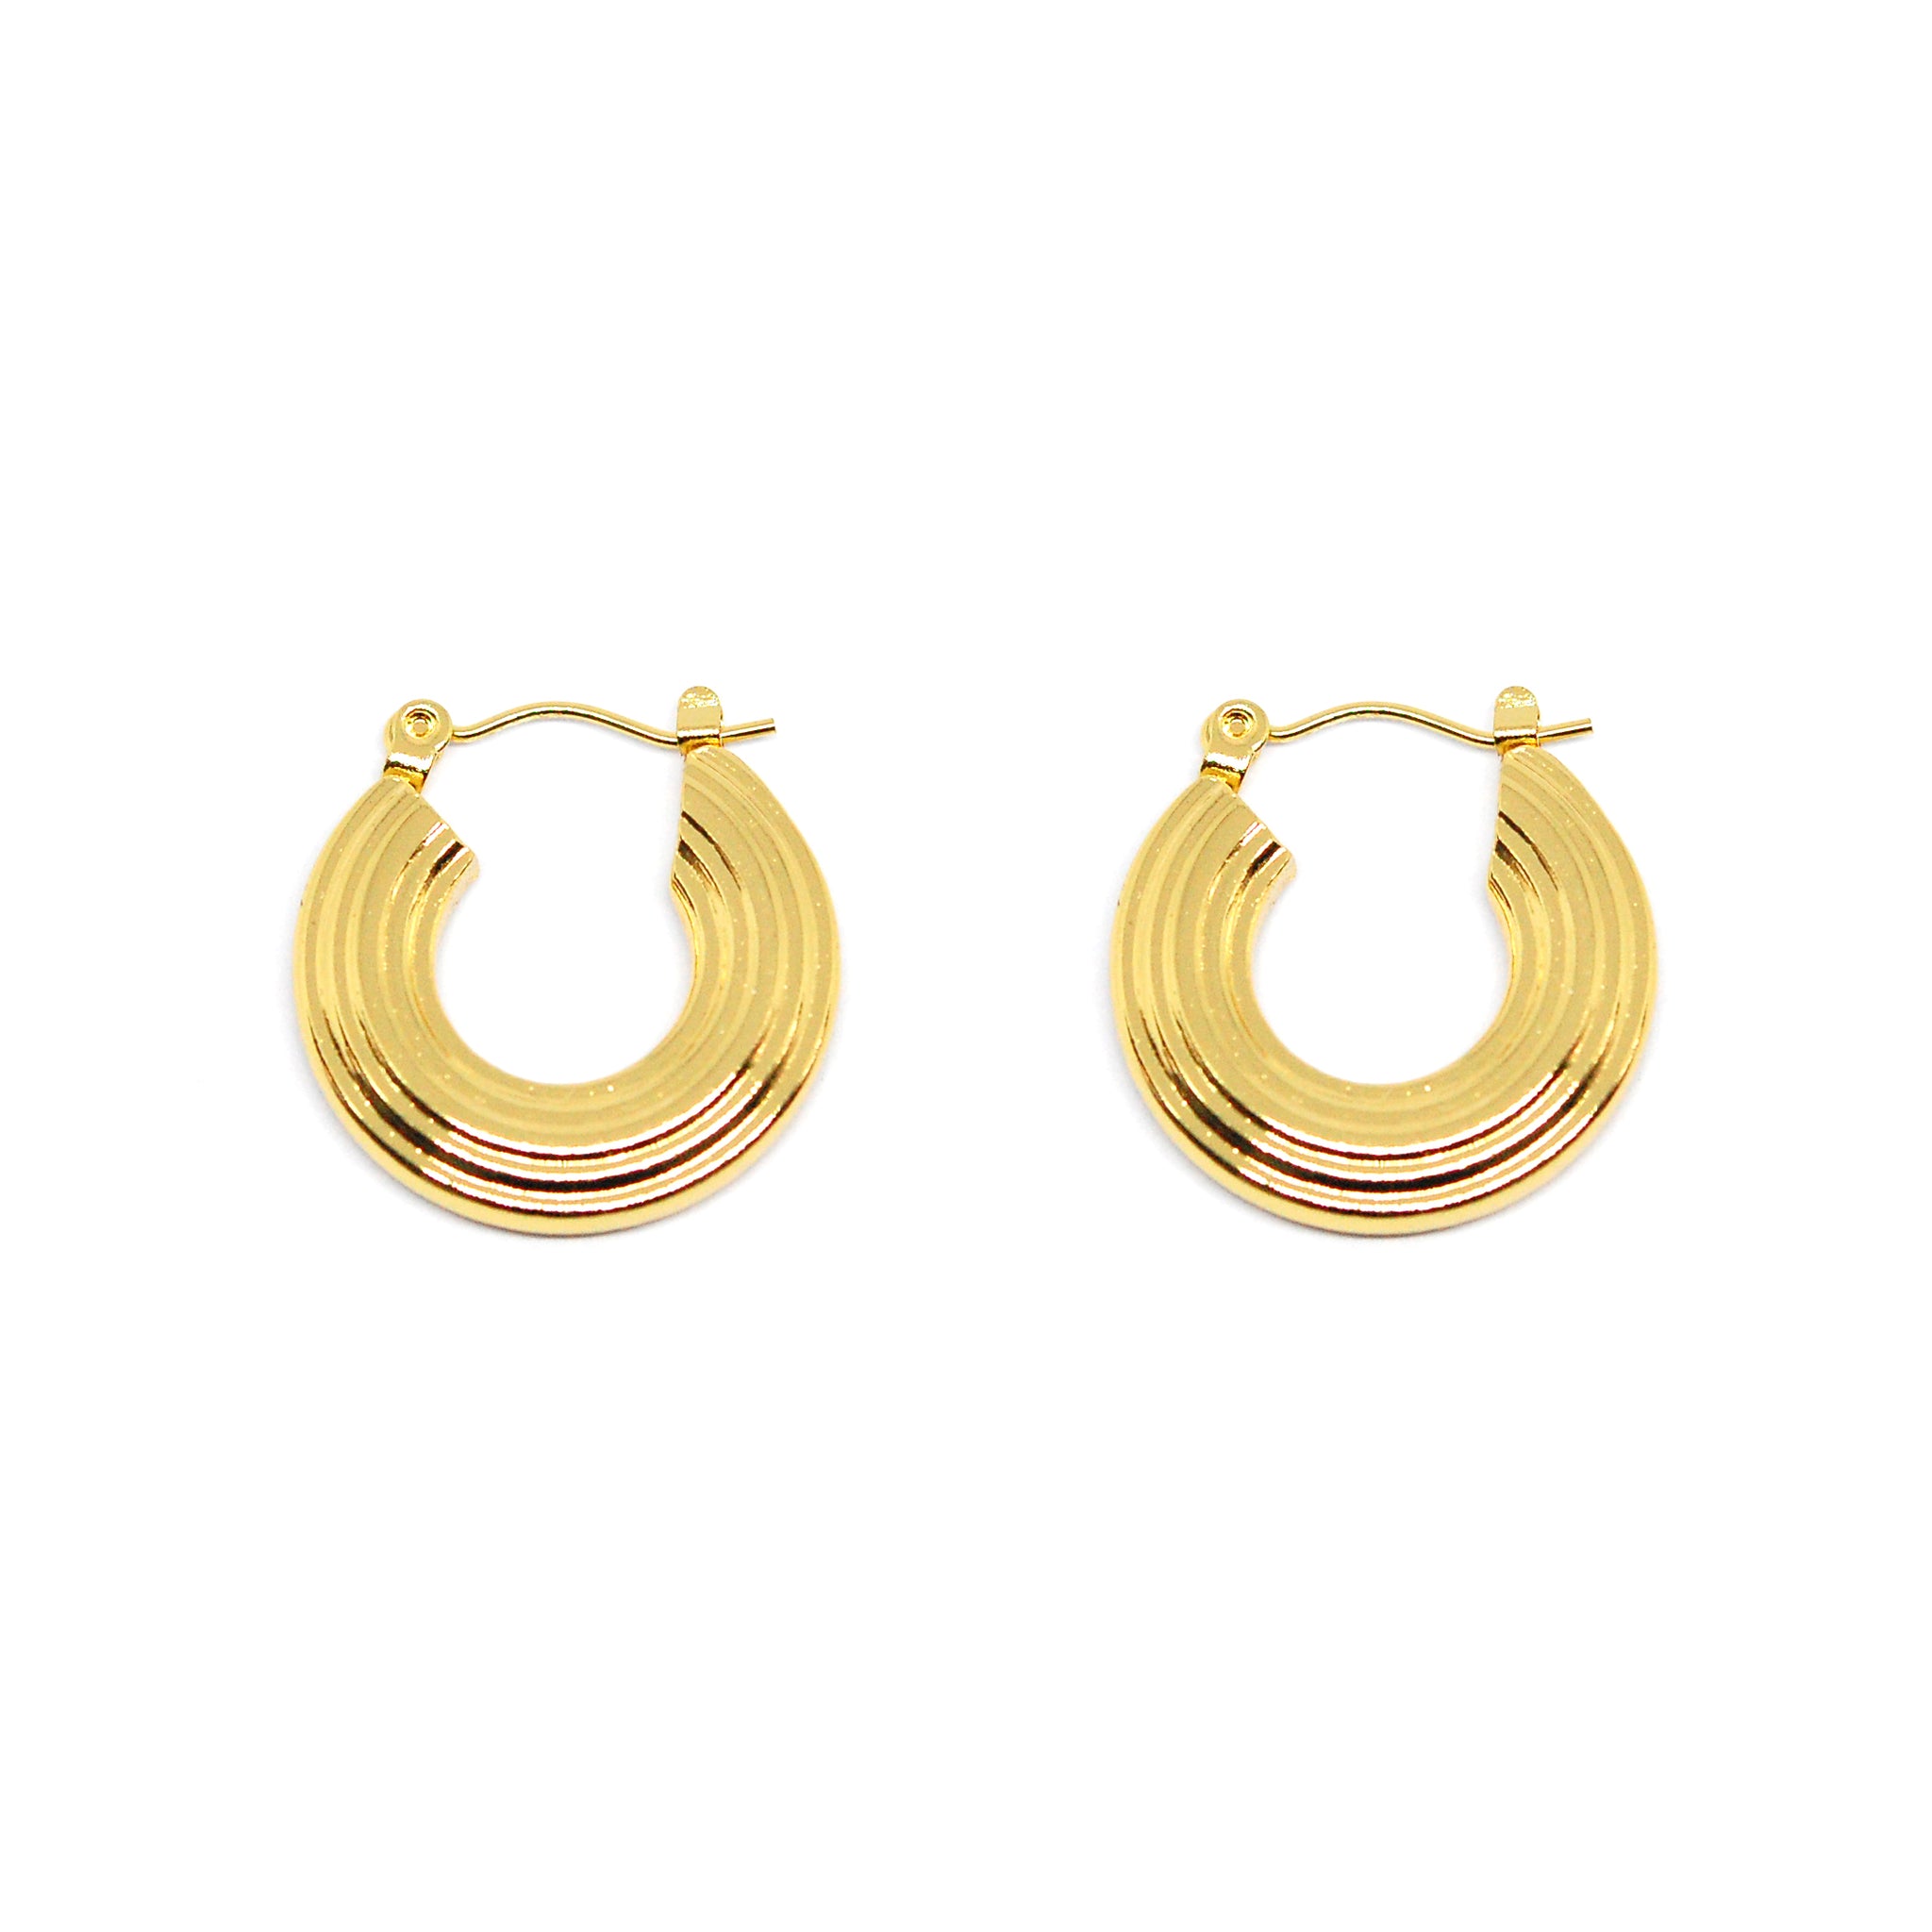 ESE 7989: All IPG Large Tribal-Lined Hoops